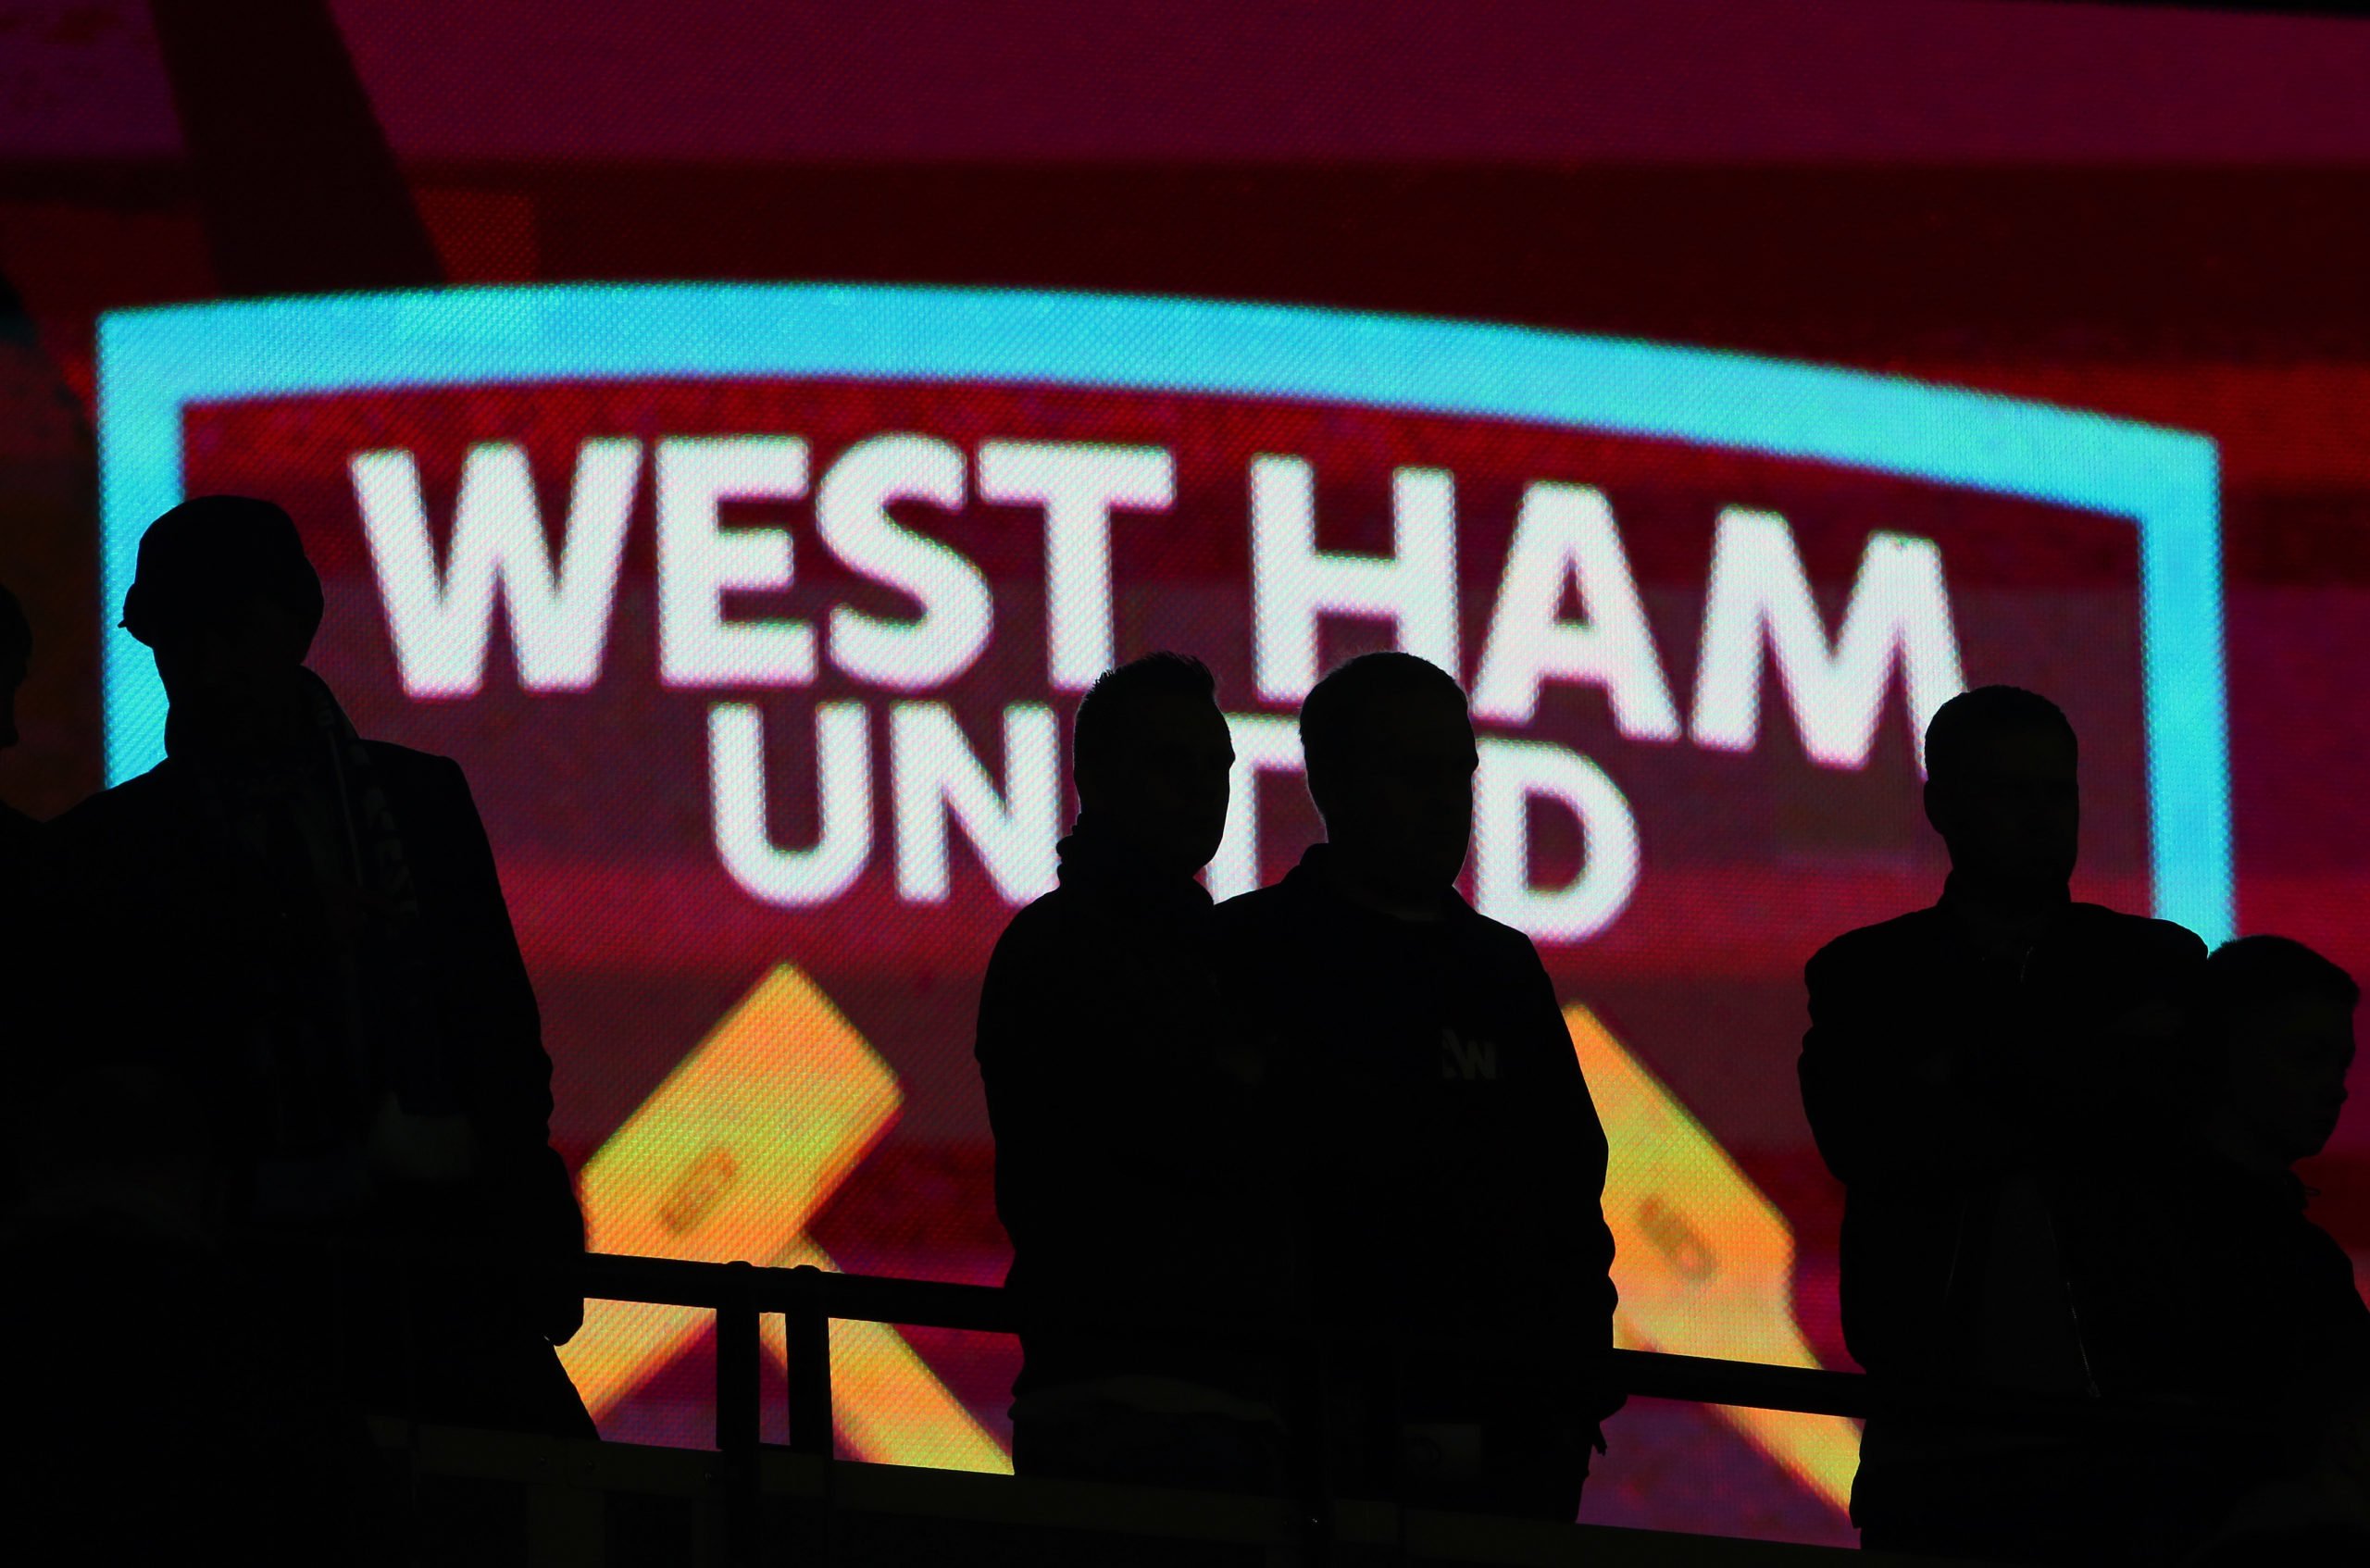 Insider delivers hugely worrying West Ham update ahead of Norwich clash